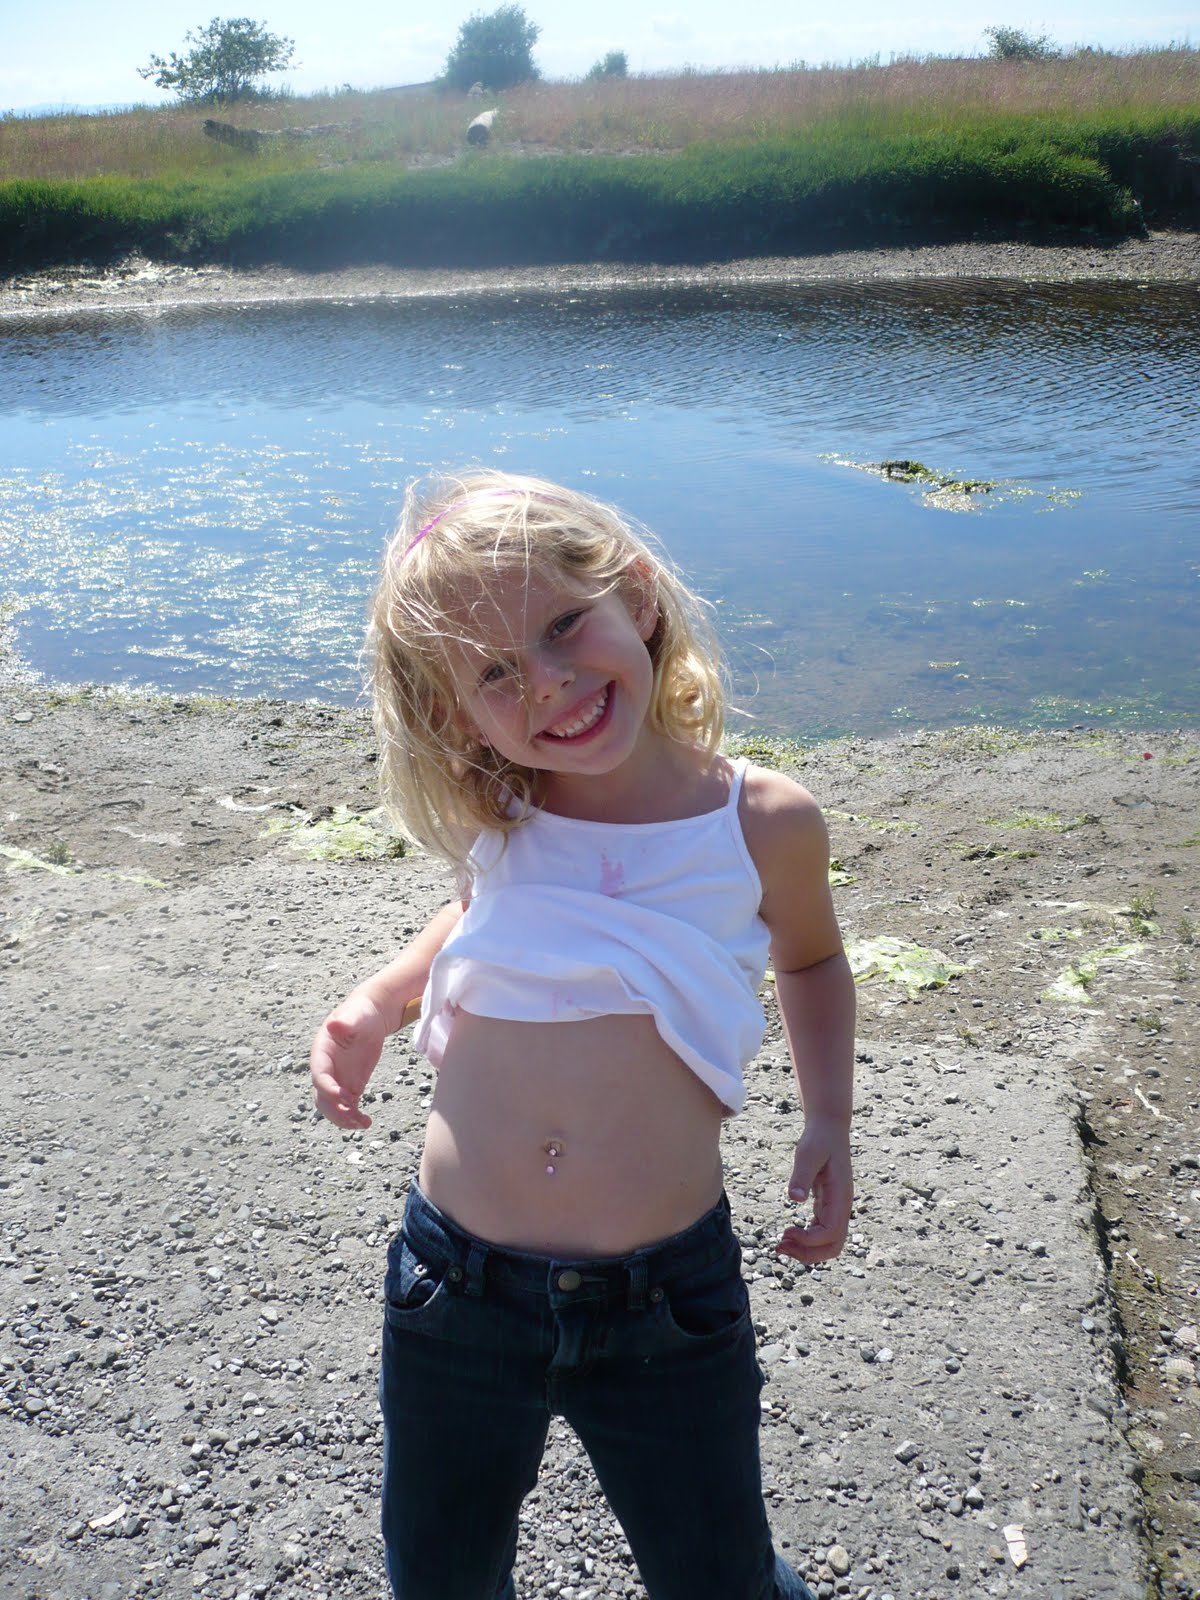 More of The Howe Girls: belly button ring?